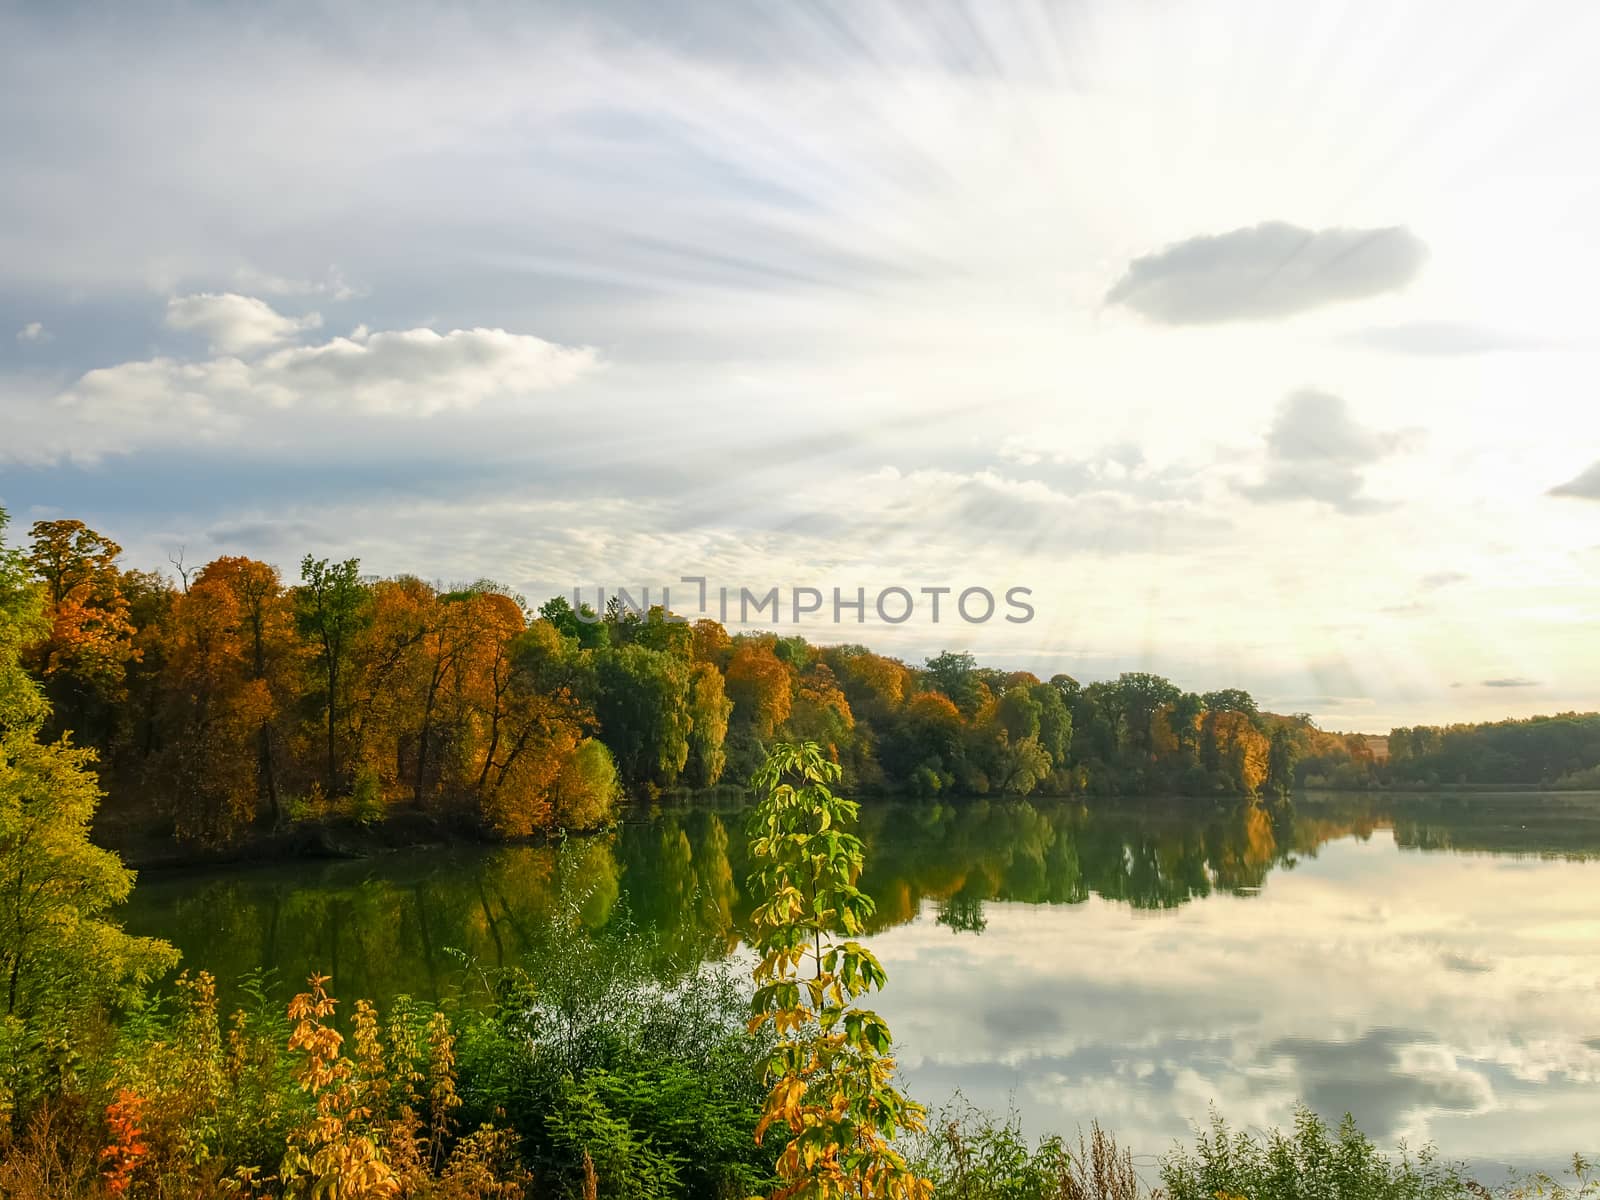 Autumn forest on the shore of the lake and reflection of trees and sky with clouds in calm surface of the water at sunset
